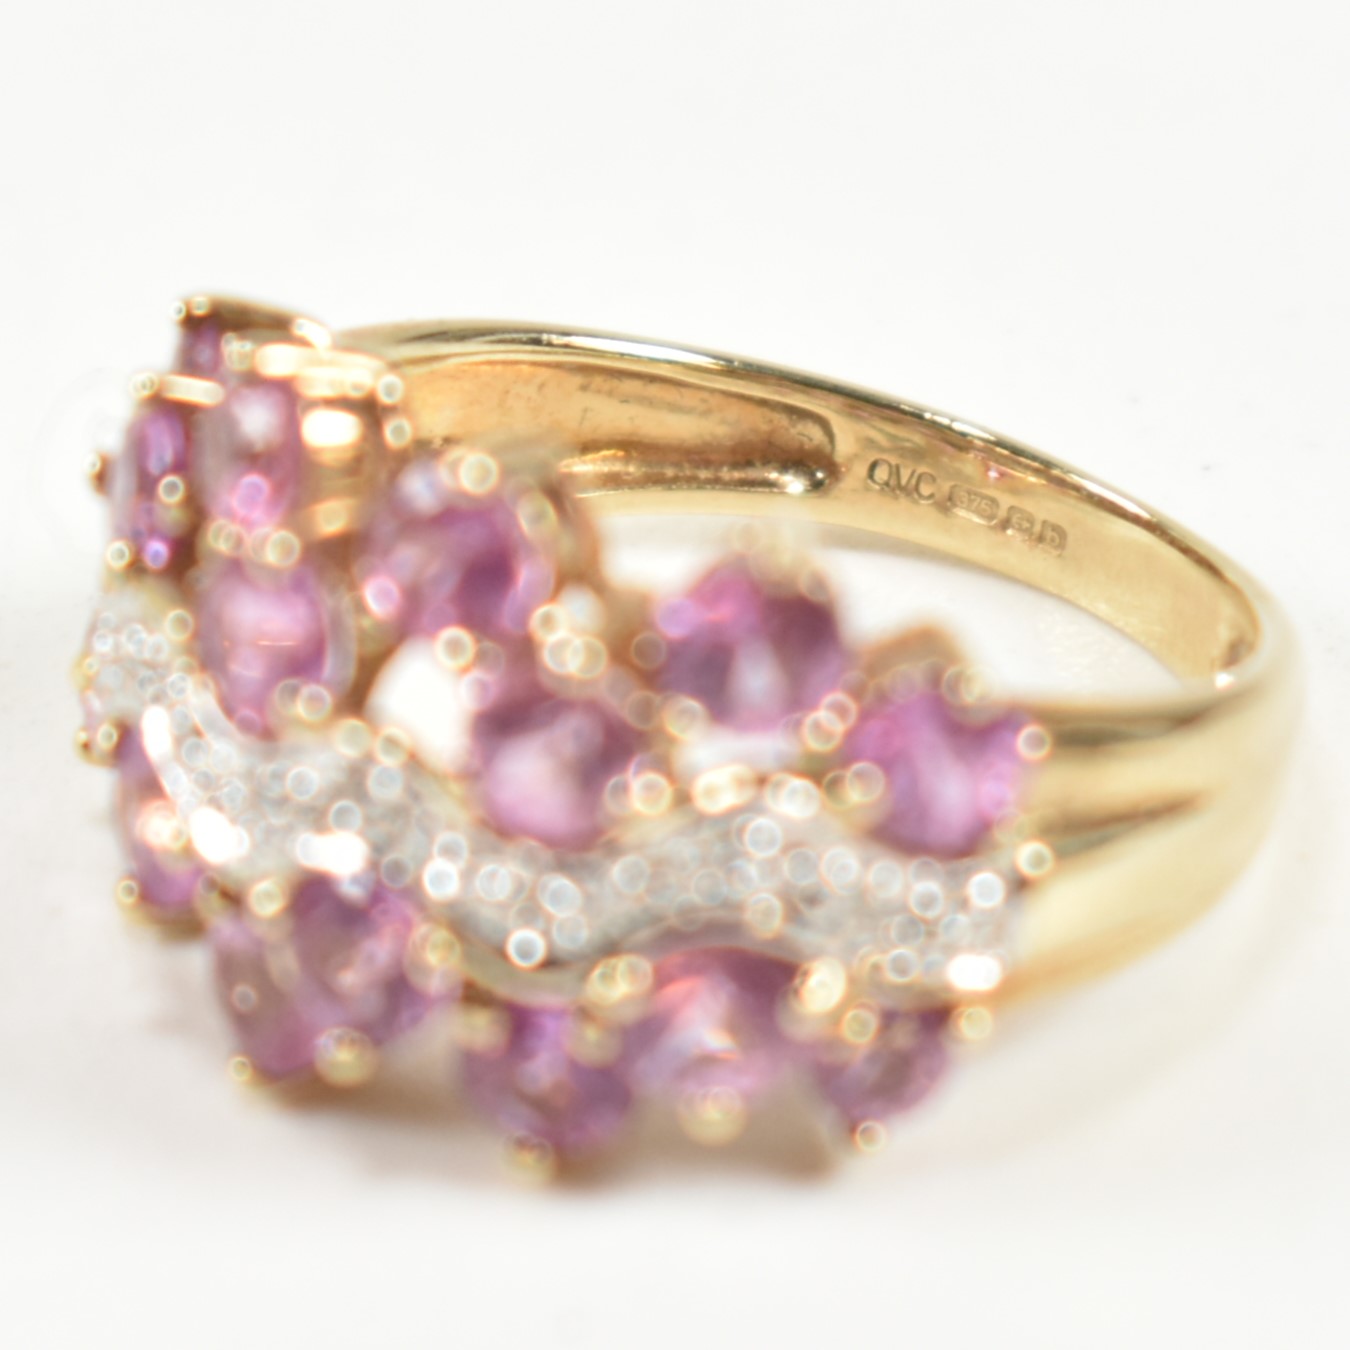 HALLMARKED 9CT GOLD PINK SAPPHIRE & DIAMOND CLUSTER RING - Image 8 of 9